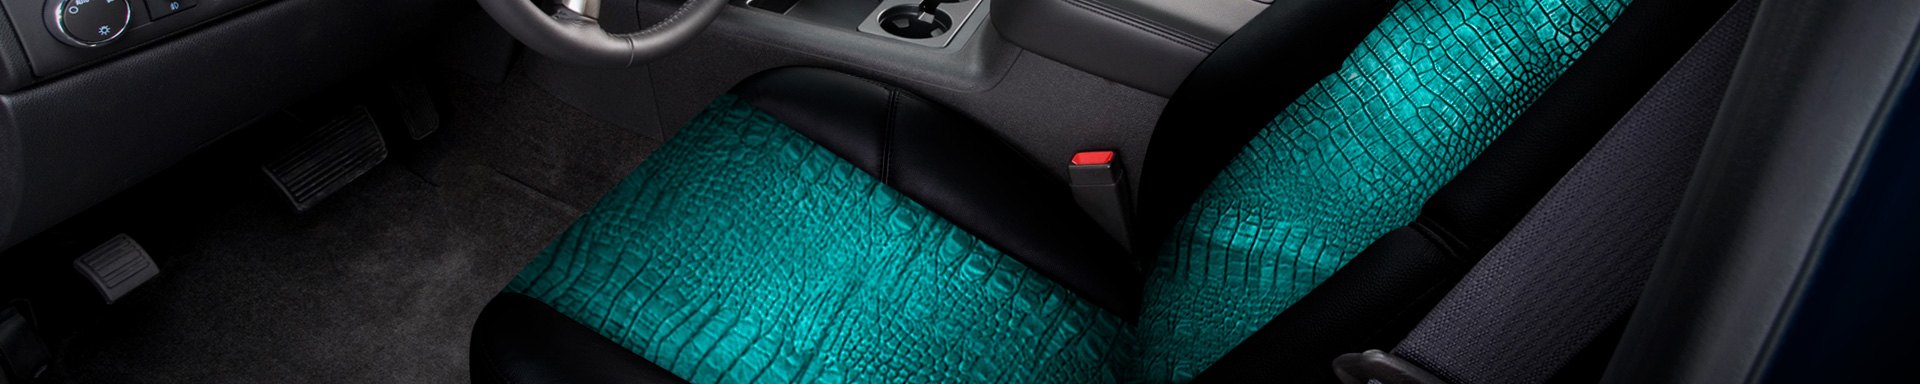 Meet All-New Original Alligator Jeweled Pattern Seat Covers by Coverking